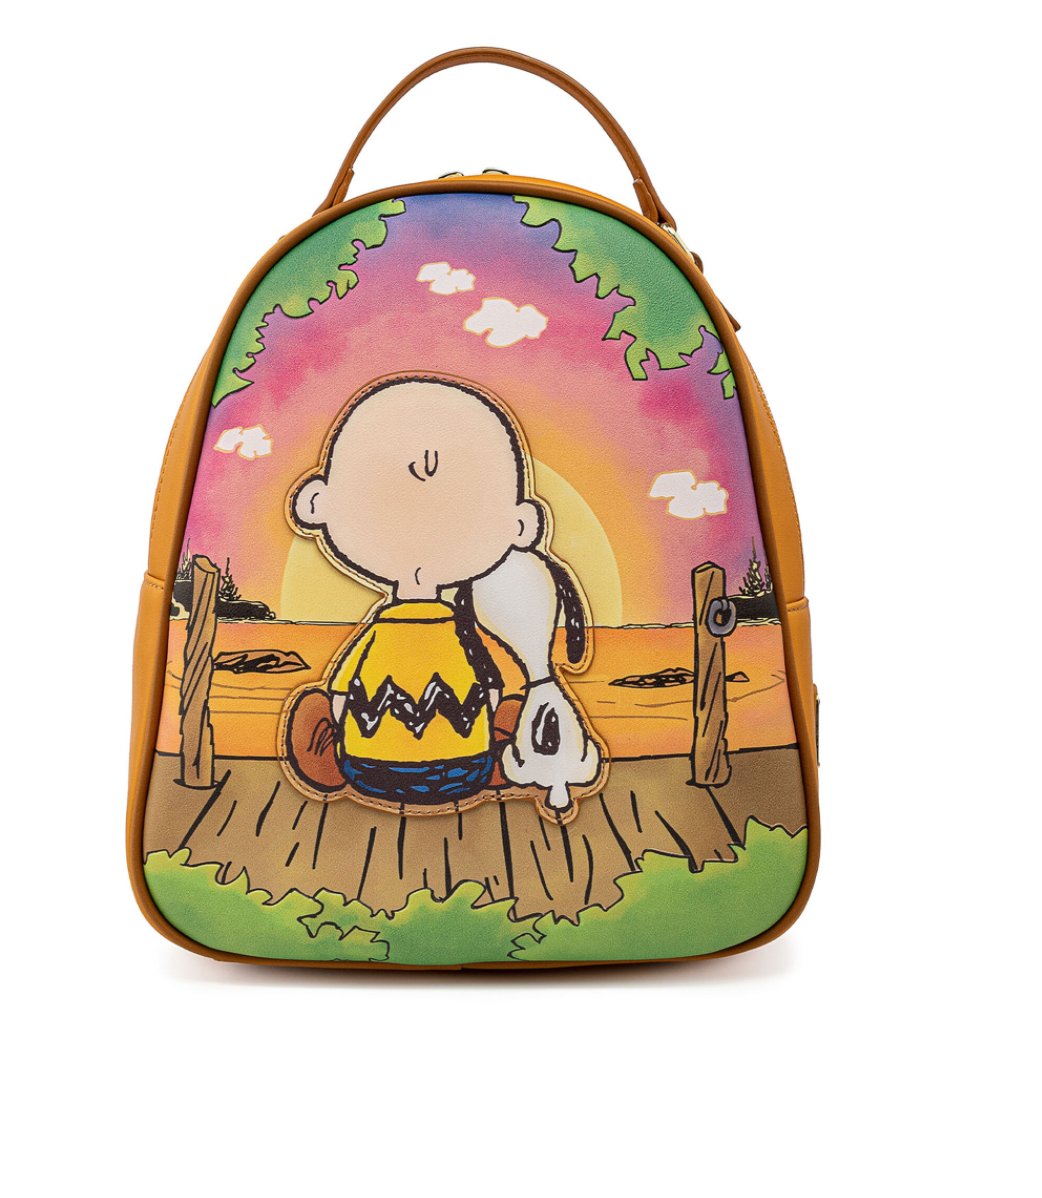 Hallmark Peanuts Charlie Brown and Snoopy Sunset Mini Backpack New with Tag